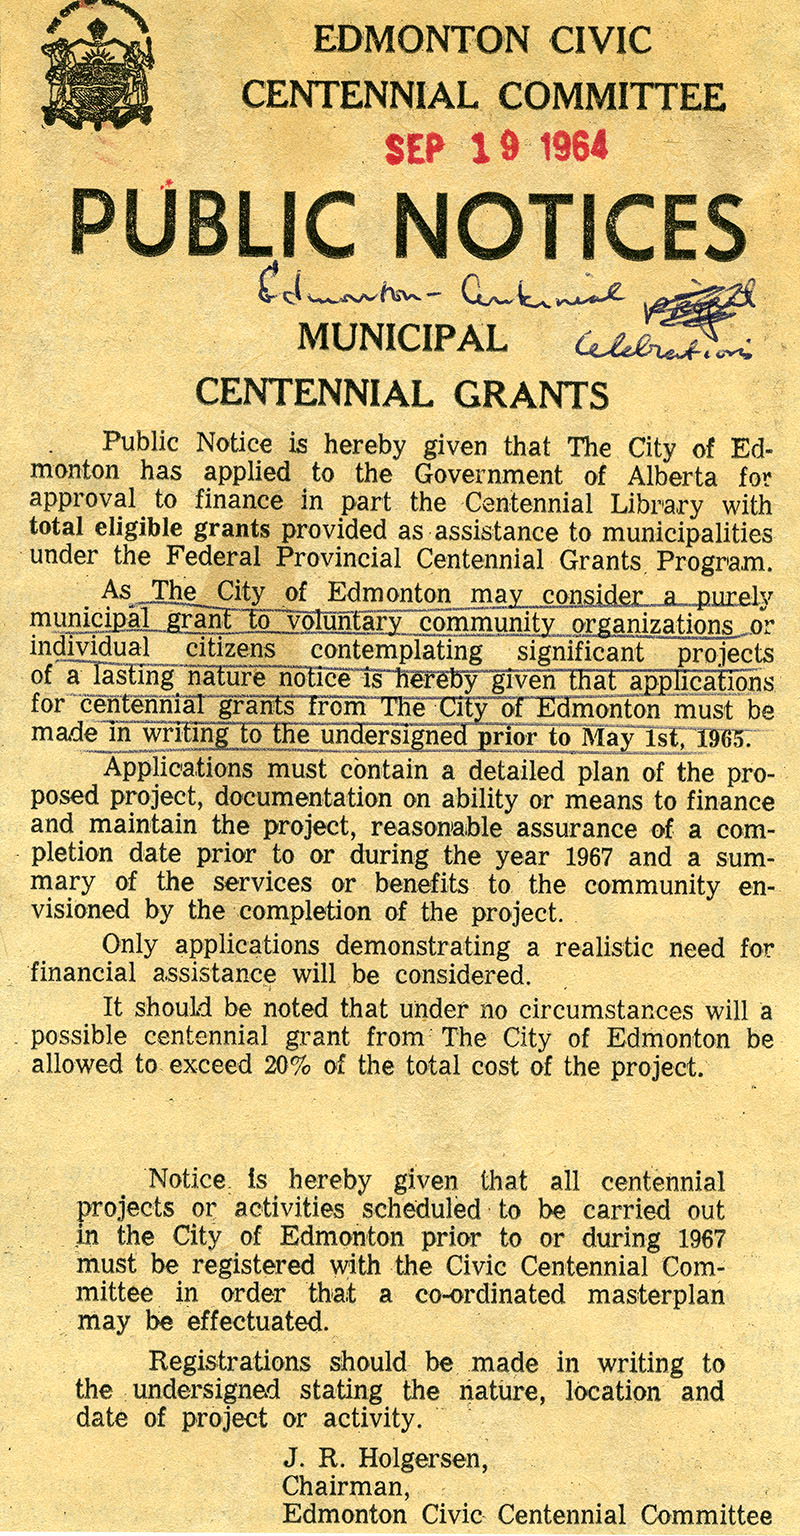 A notice from September 19, 1964, which indicates that all Centennial projects and activities scheduled in Edmonton before or during 1967 must be registered with the Civic Centennial Committee.